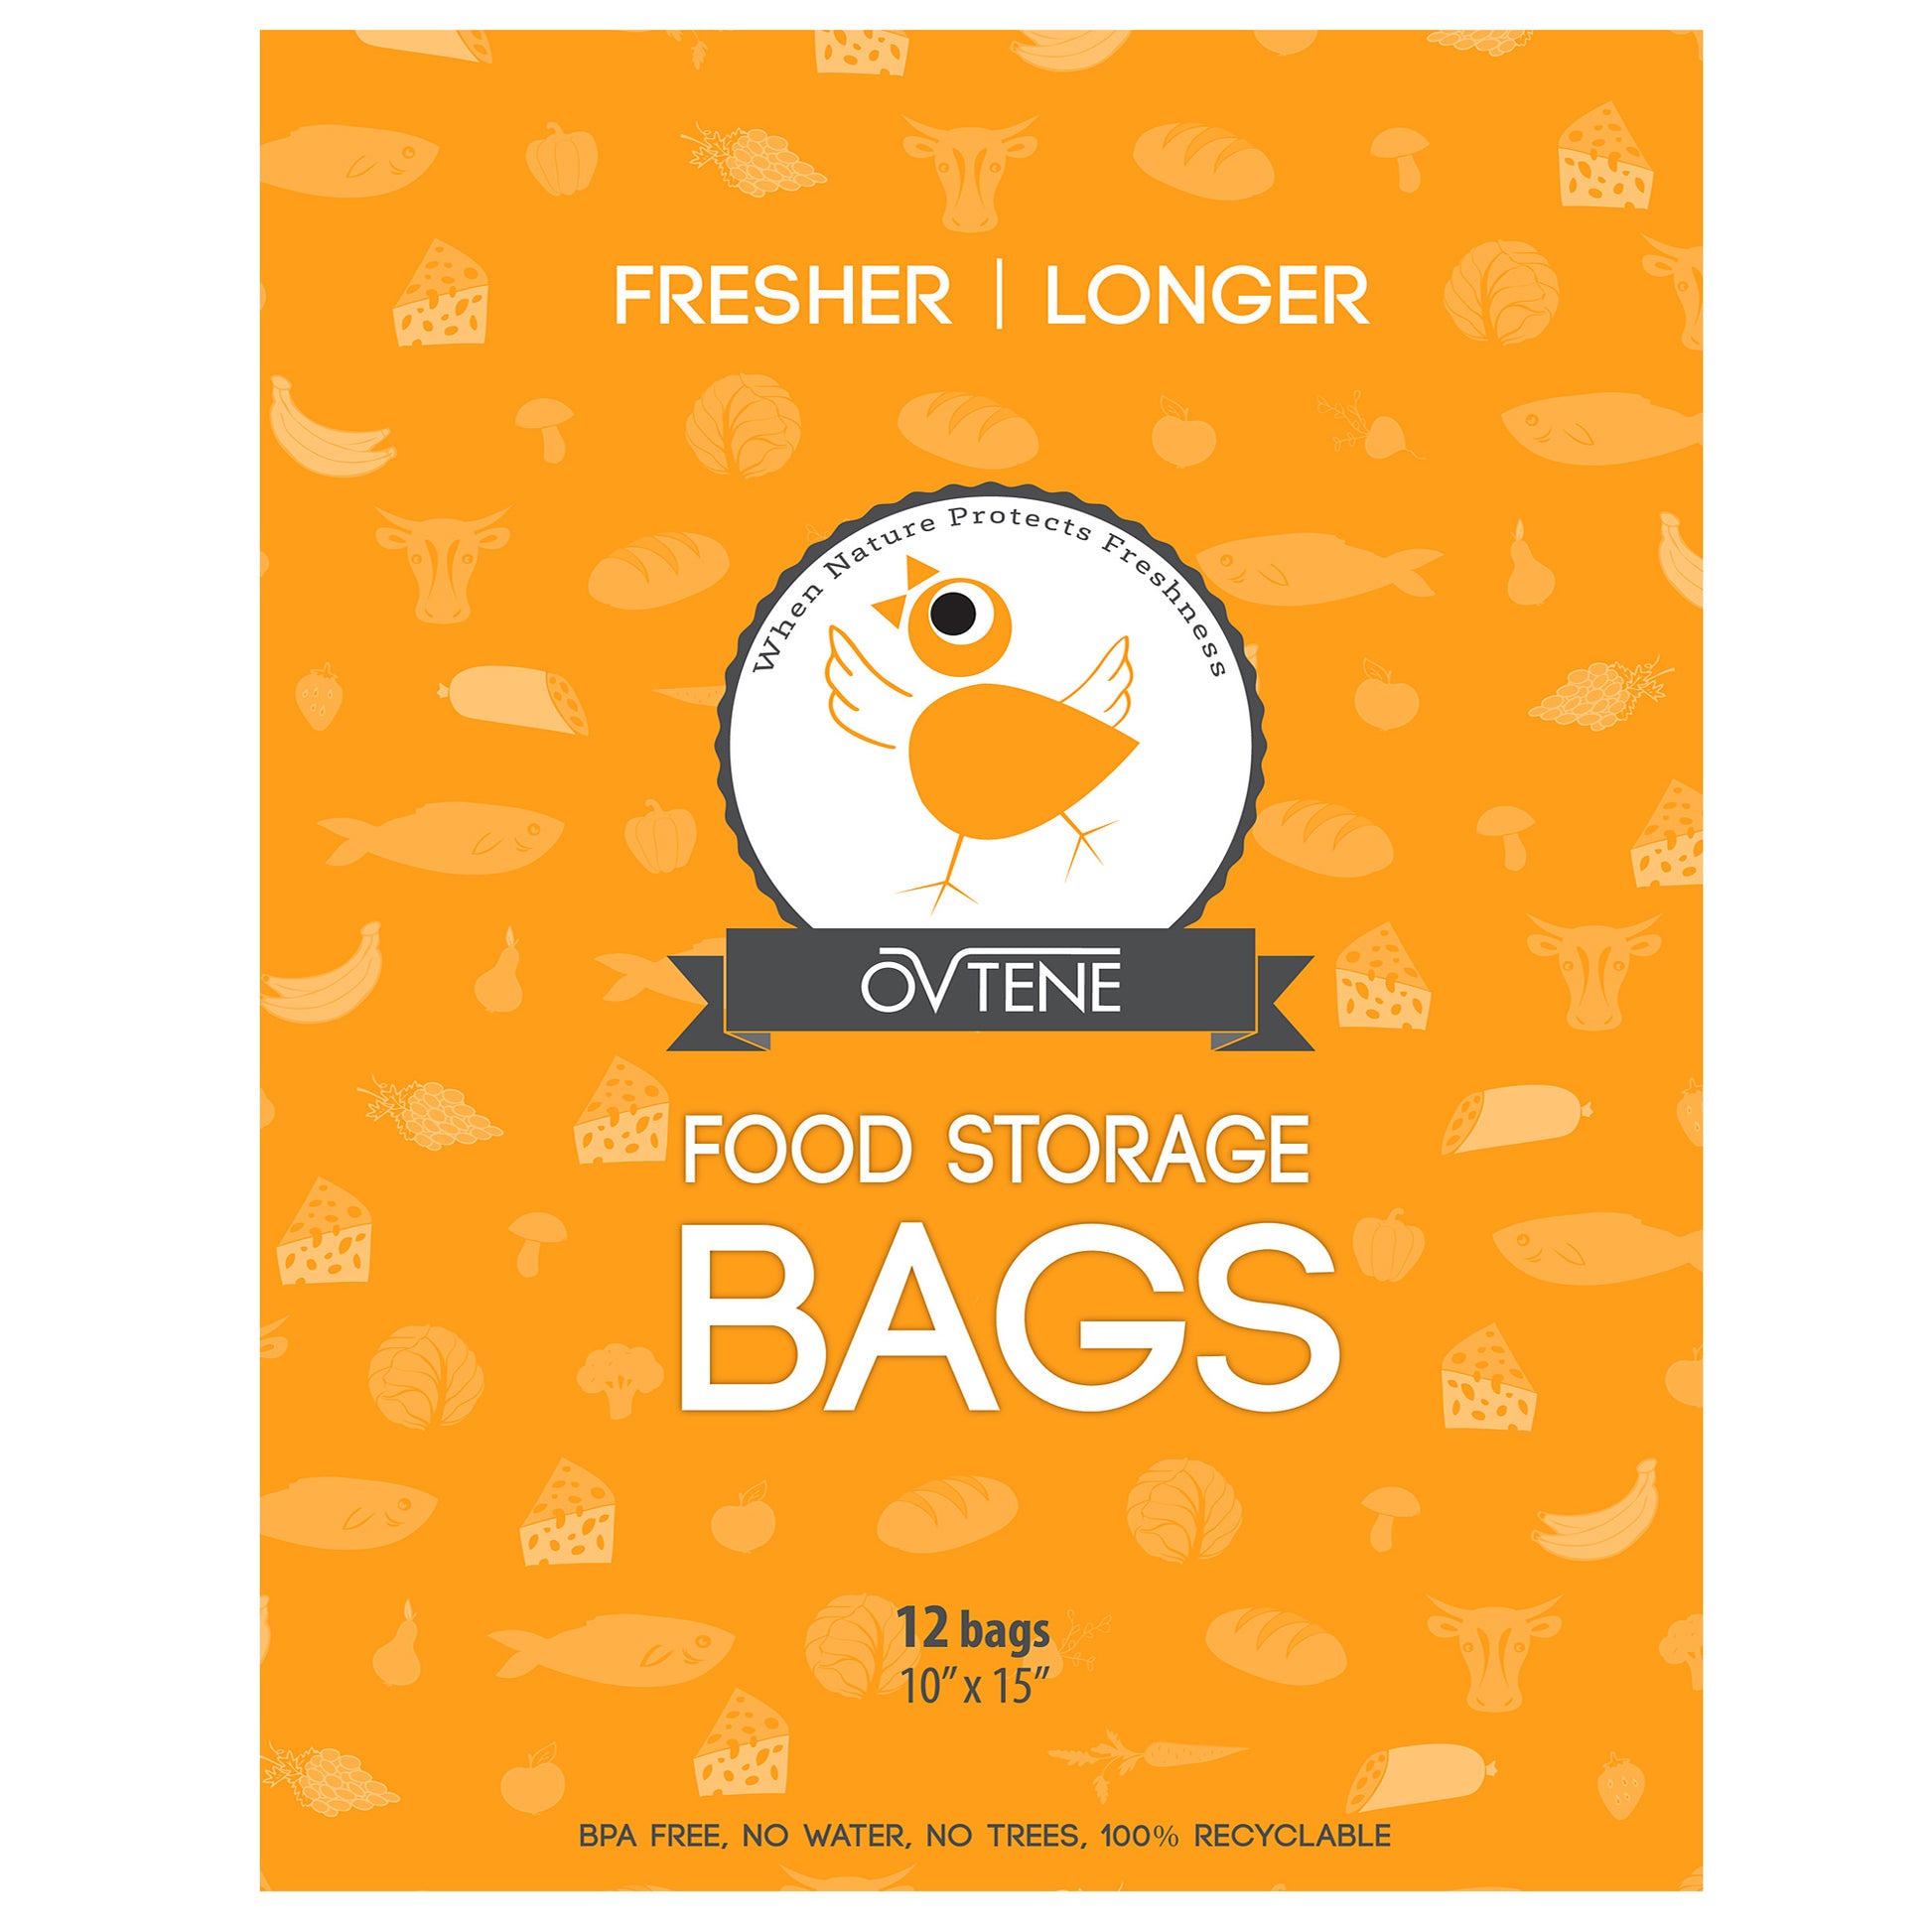 OVTENE Food Storage Bags for Cheese, Meat, and Produce - Keeps Food Fresher Longer (12 Large Bags 10x15)